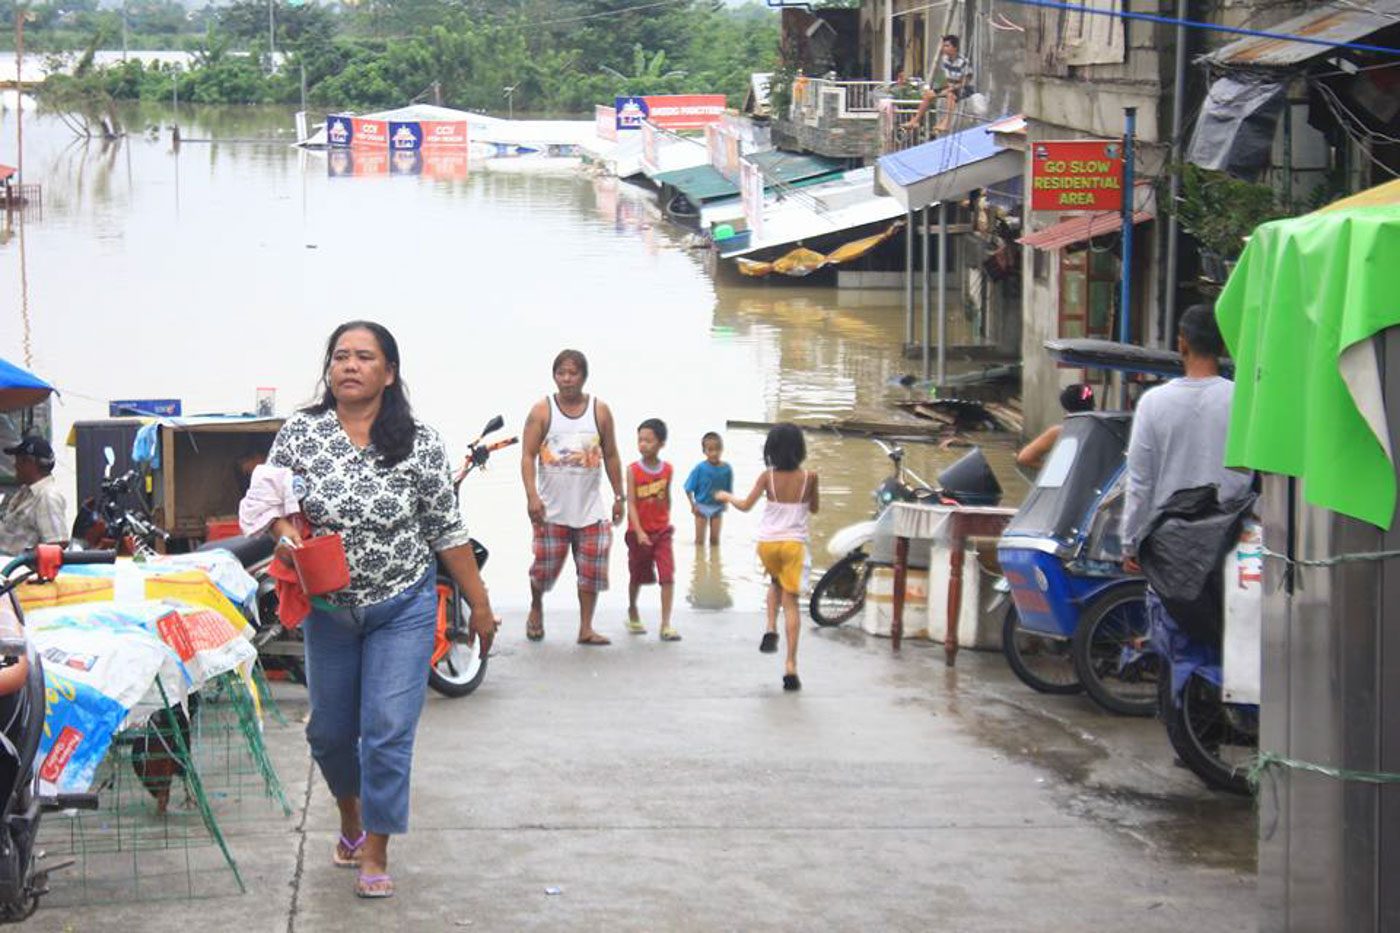 DSWD gives P300,000 in aid to families in flood-hit Cagayan Valley